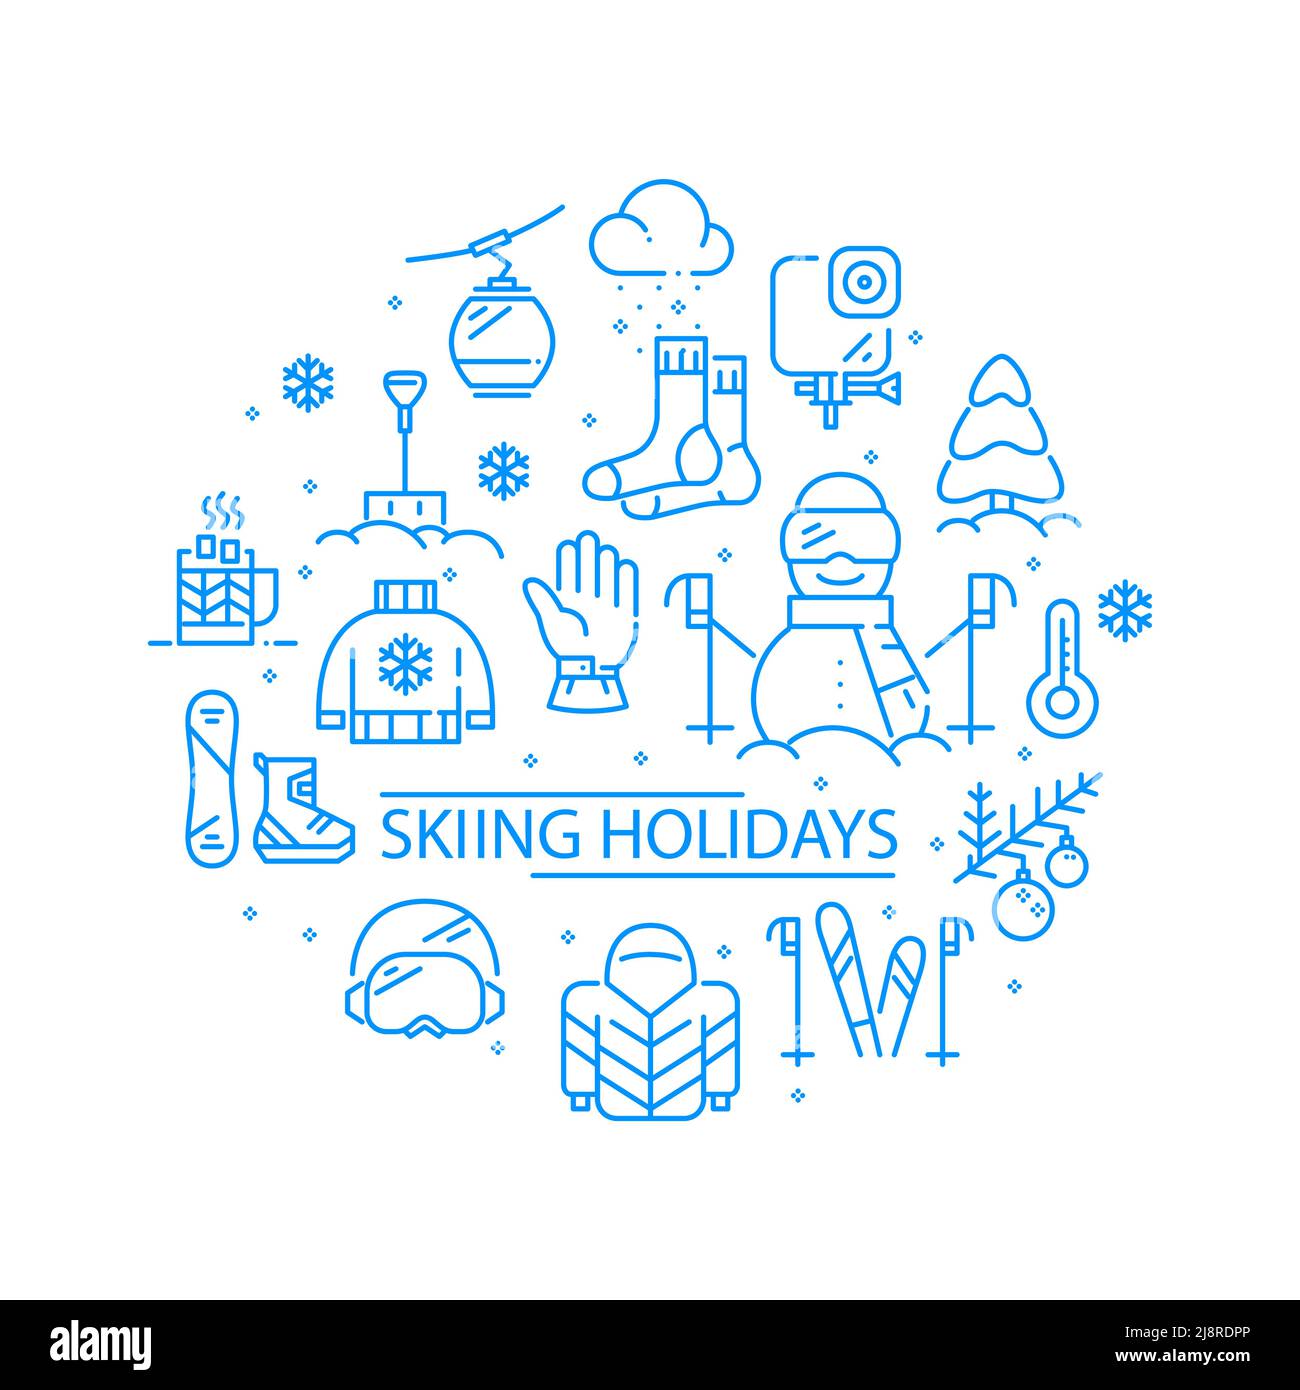 Skiing holidays cute winter mountain sports icons collage Stock Vector